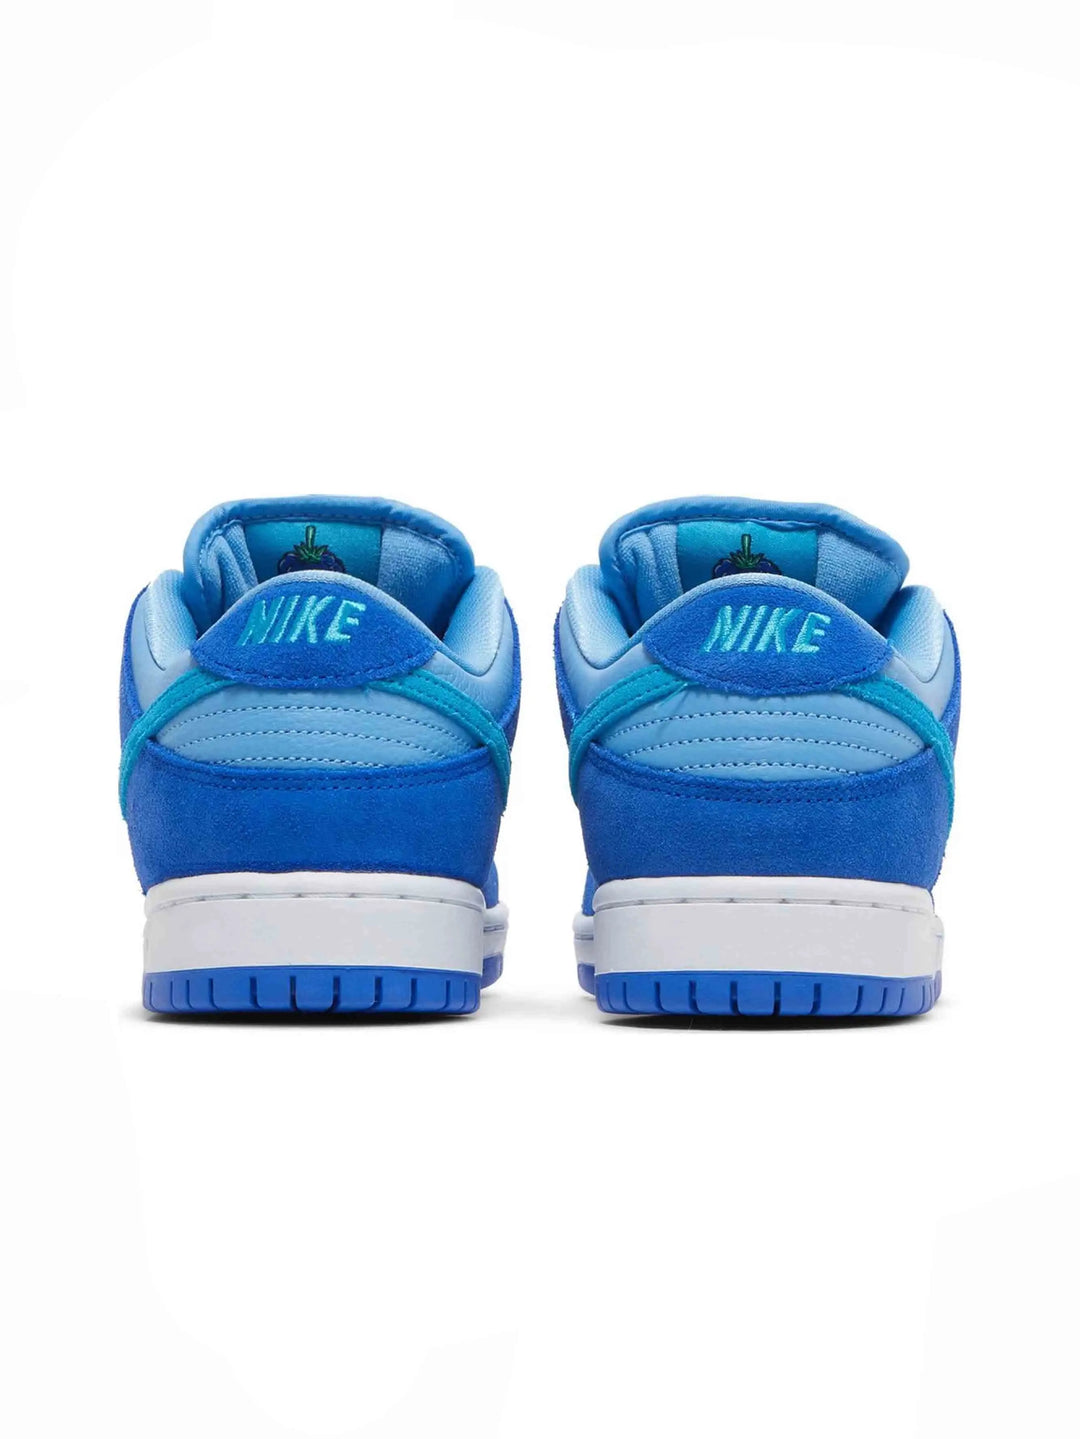 Nike SB Dunk Low Blue Raspberry in Auckland, New Zealand - Shop name